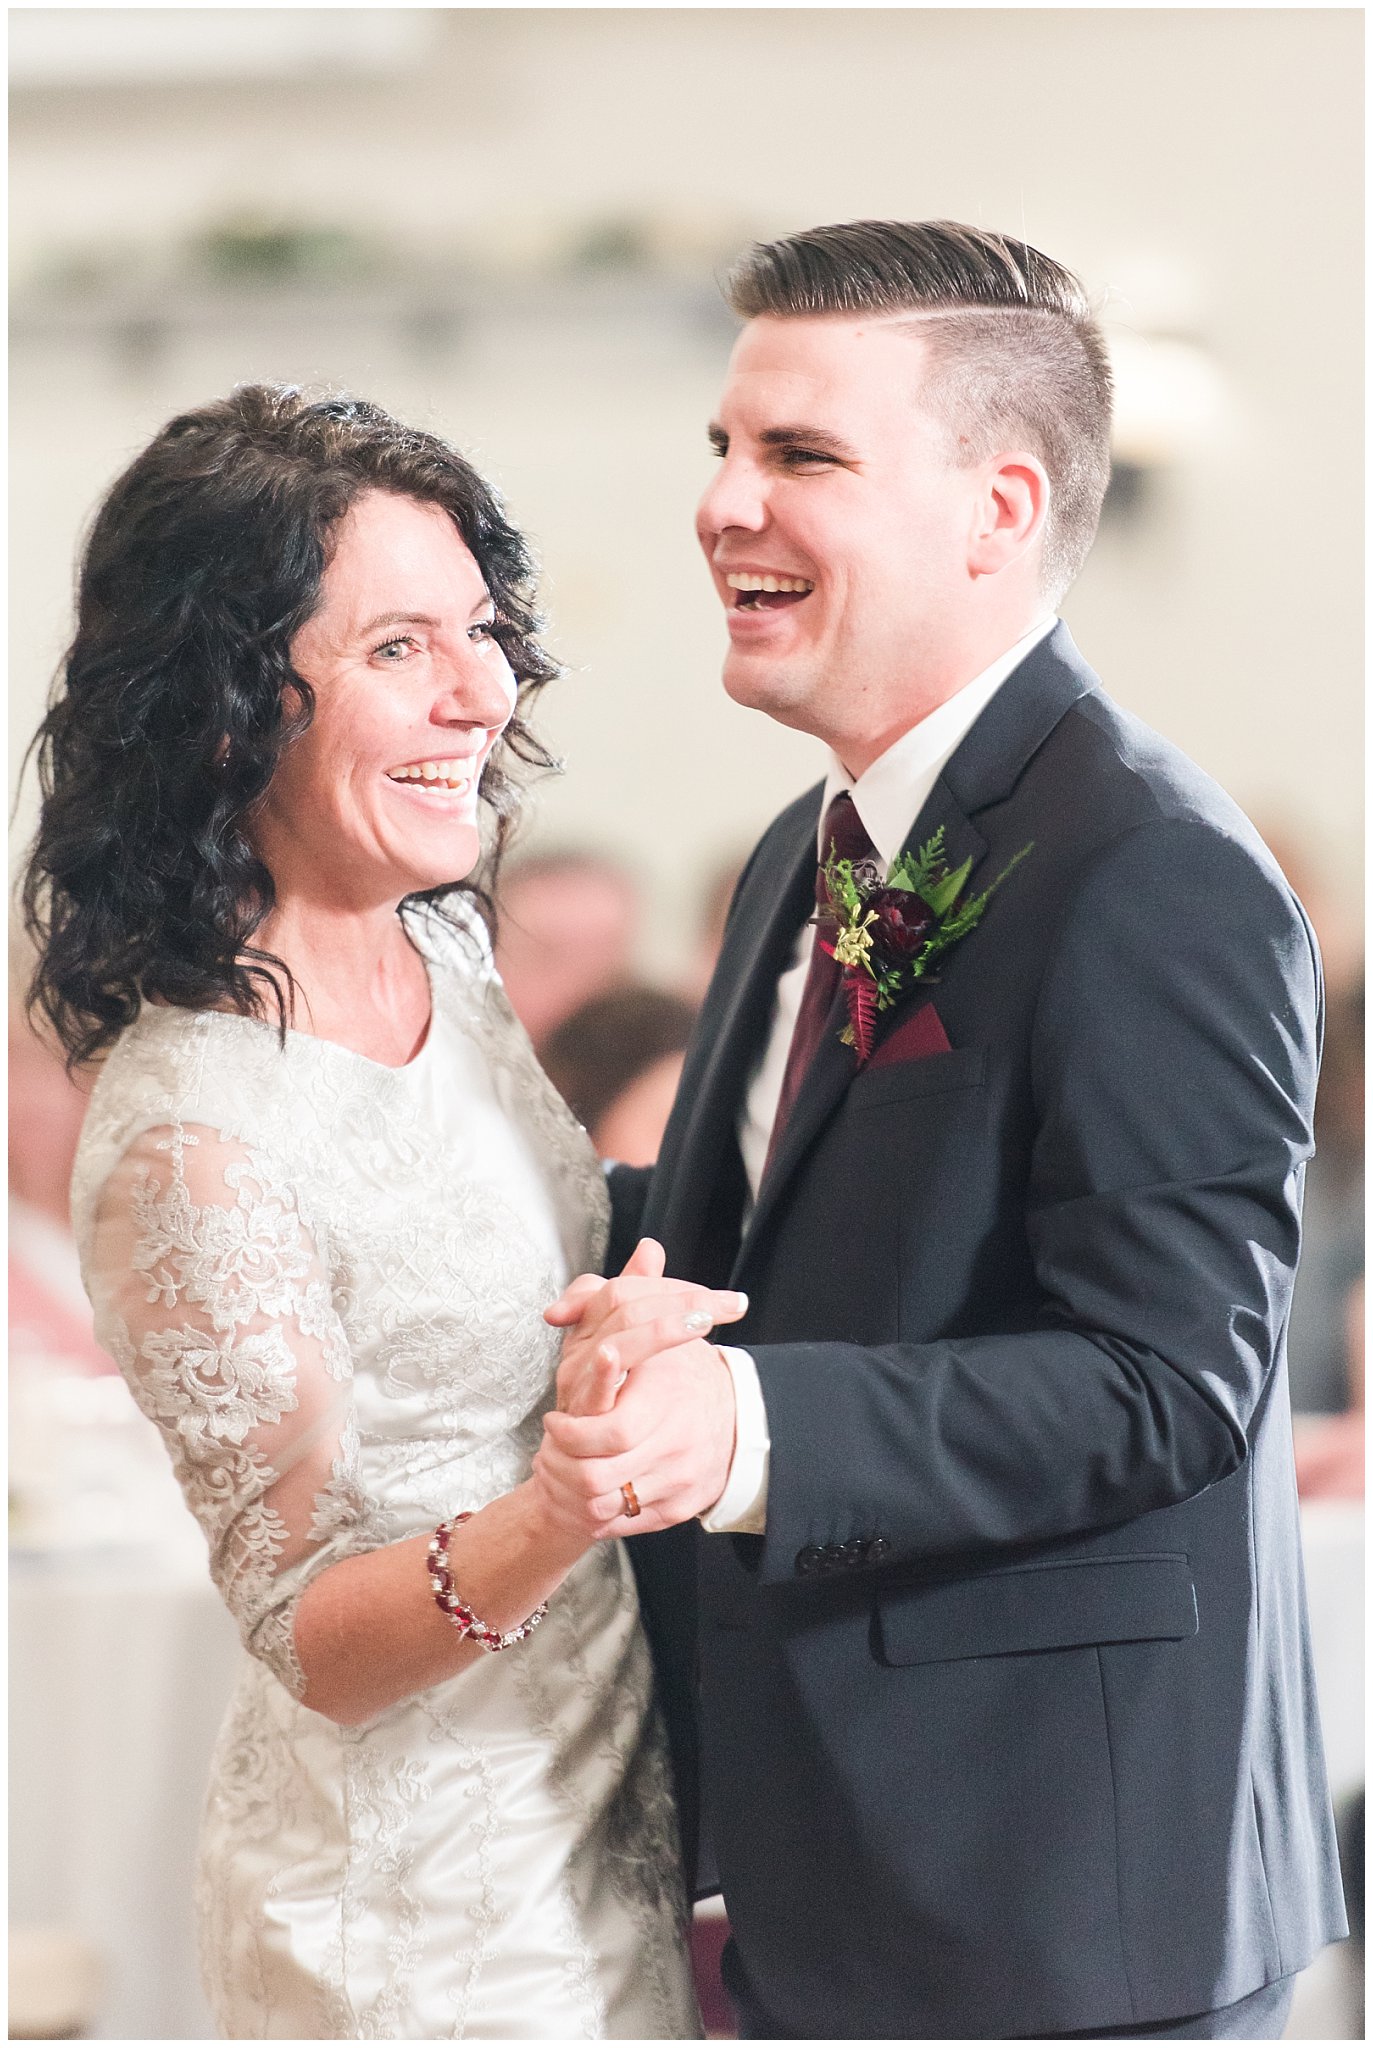 Mother son dance at the Gathering Place at Gardner Village | Gardner Village Wedding | The Gathering Place | Jessie and Dallin Photography